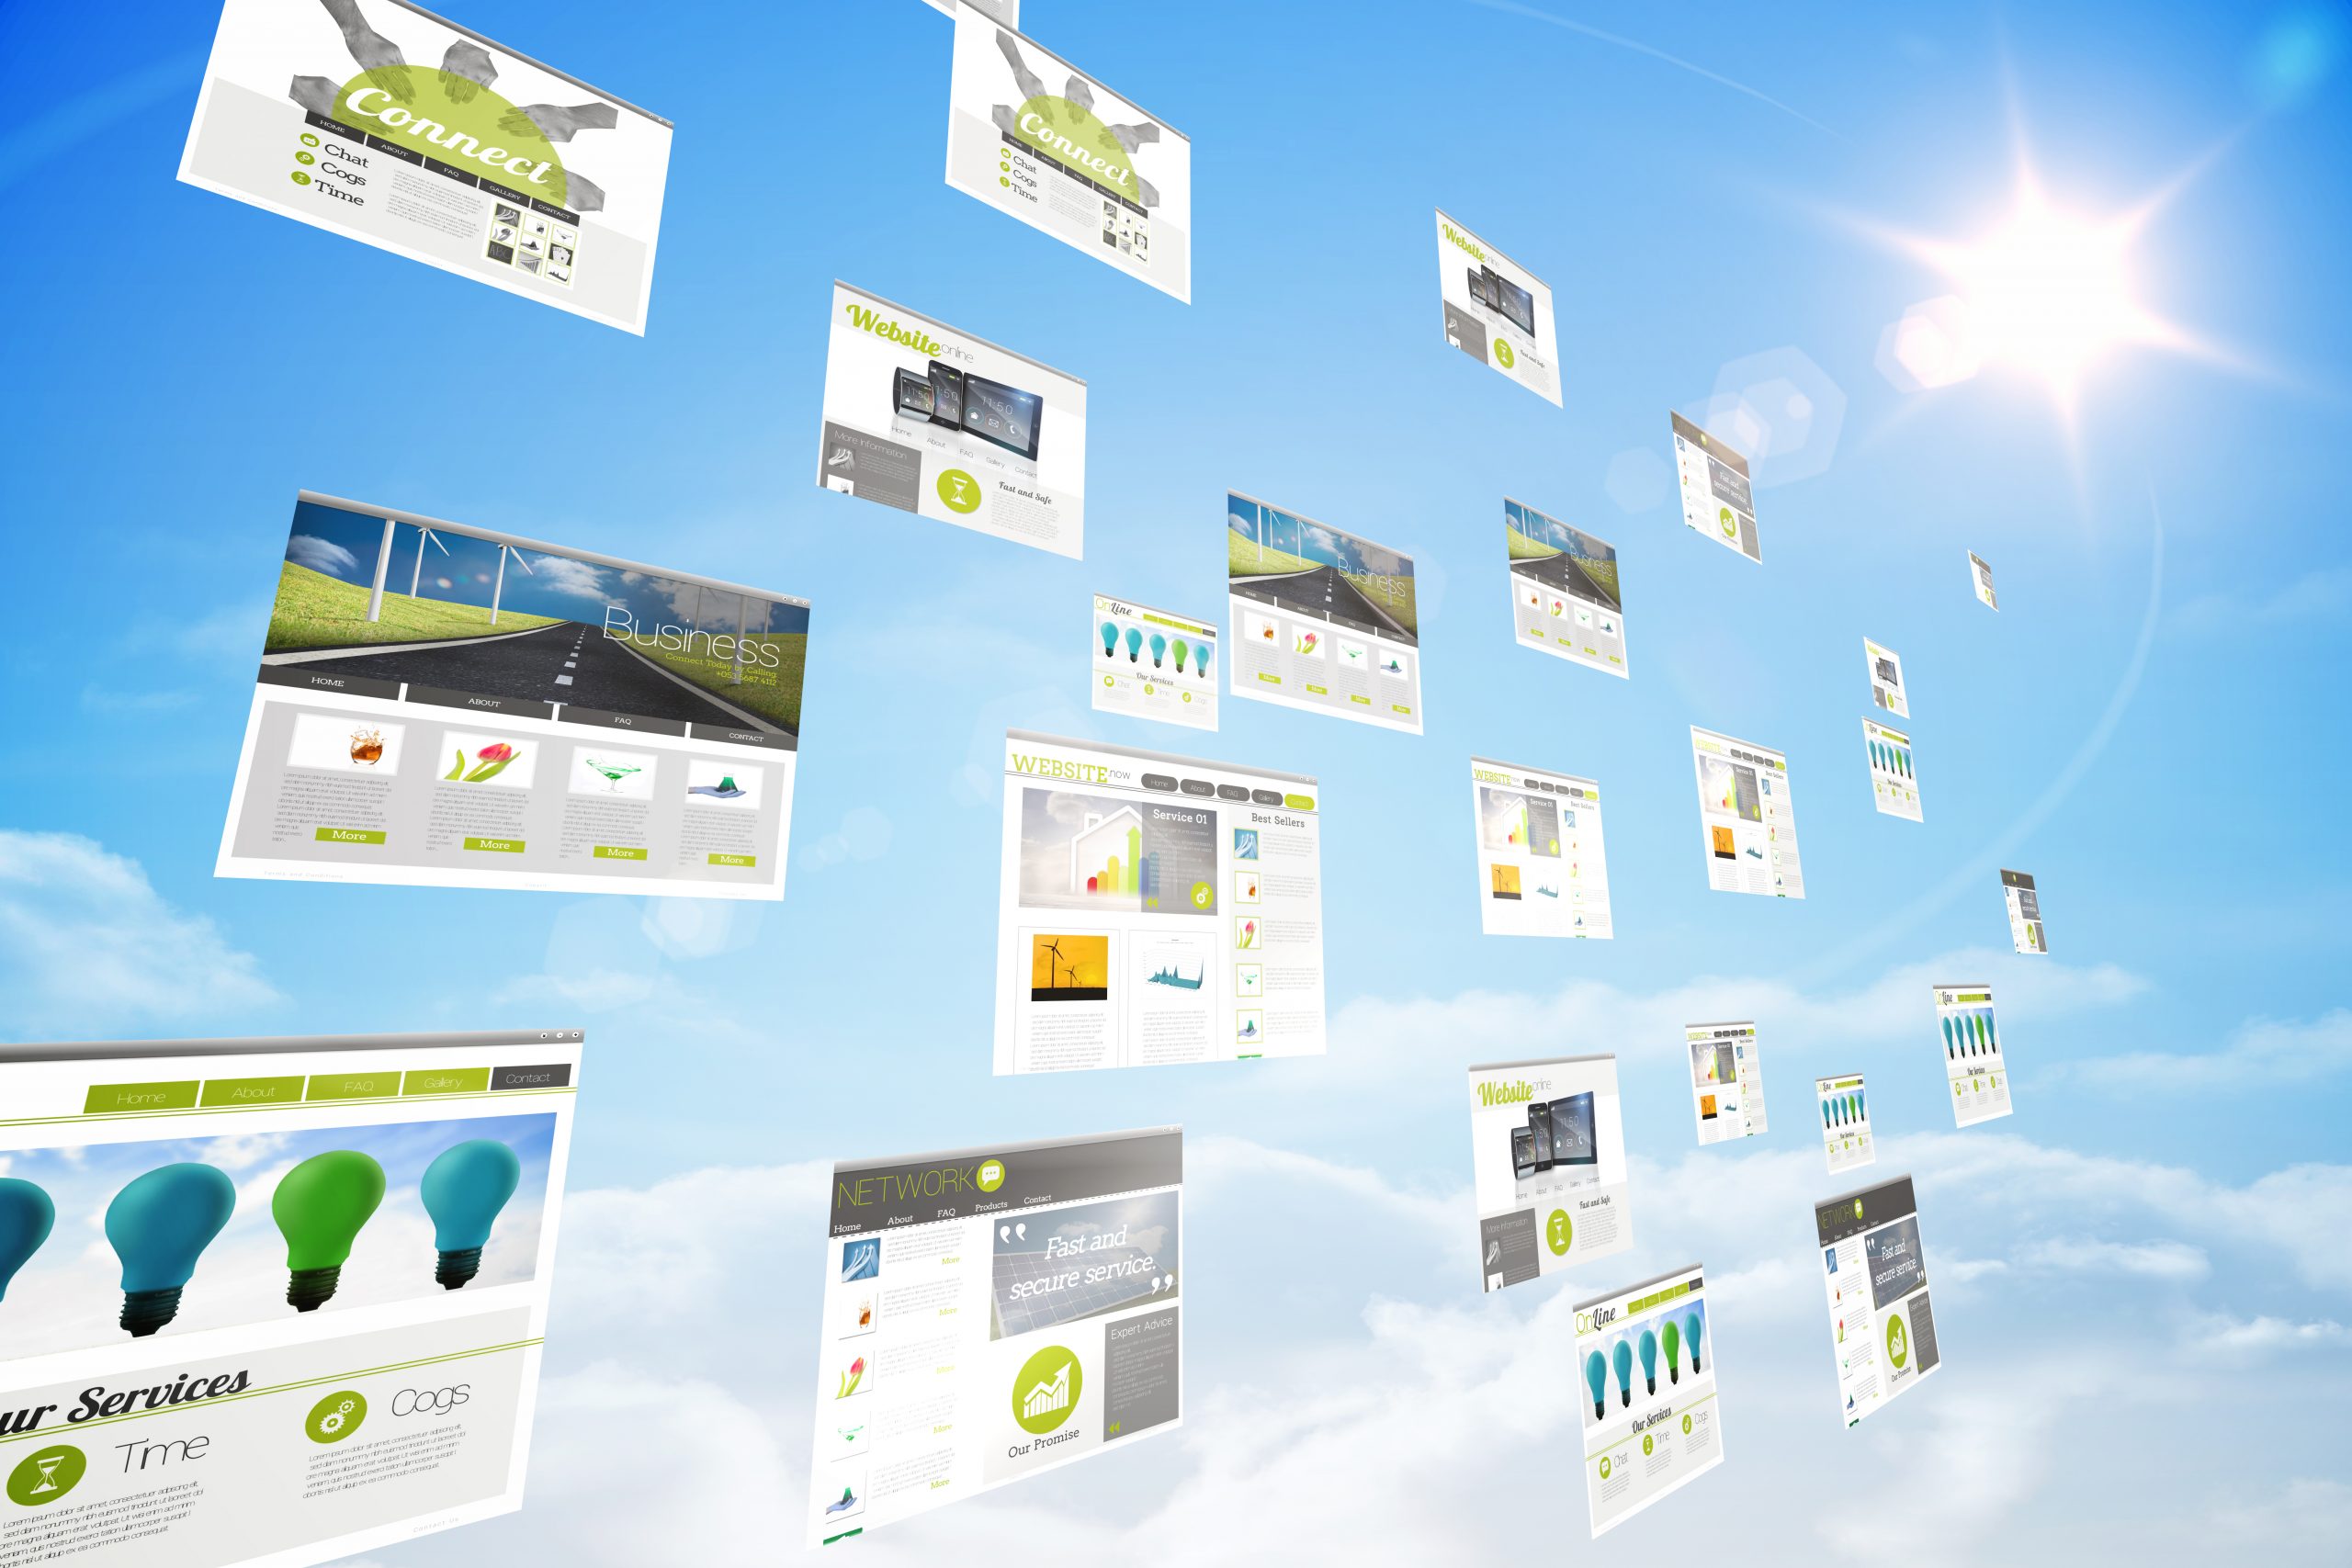 Digital composite of screens showing business advertisement in blue sky